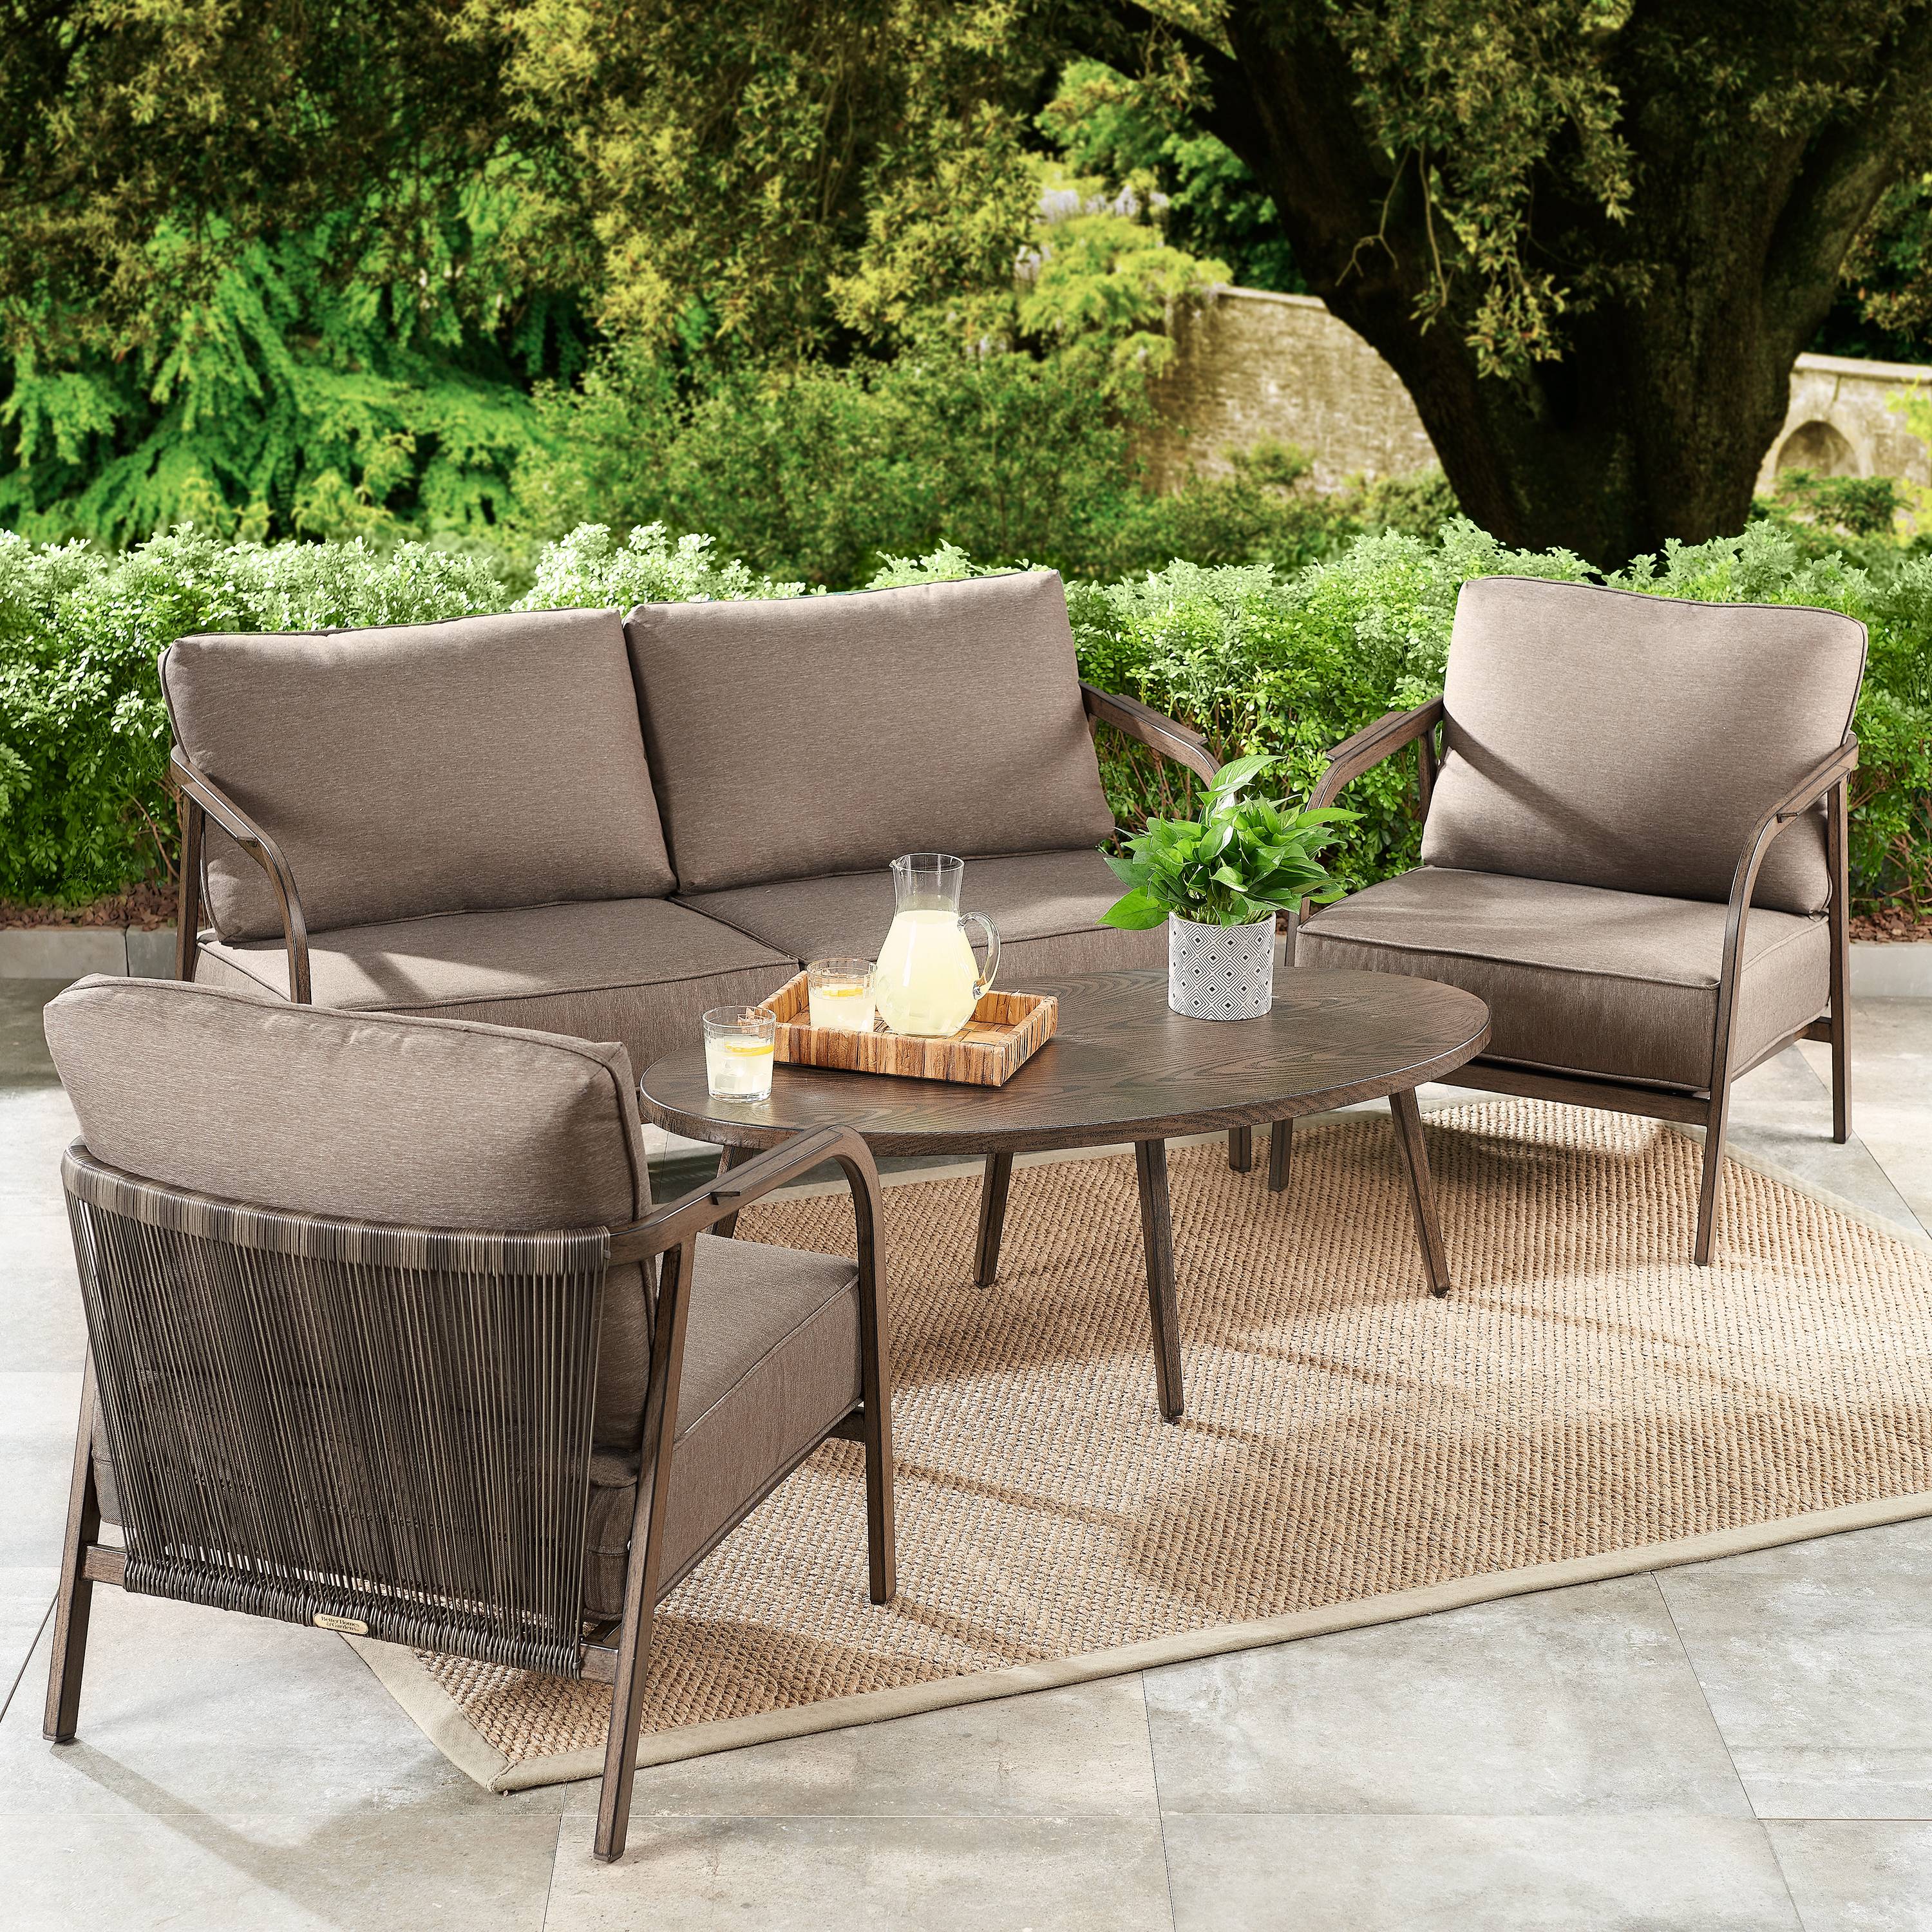 Better Homes & Gardens Arlo 4-Piece Patio Loveseat Set with Beige Cushions - image 1 of 8